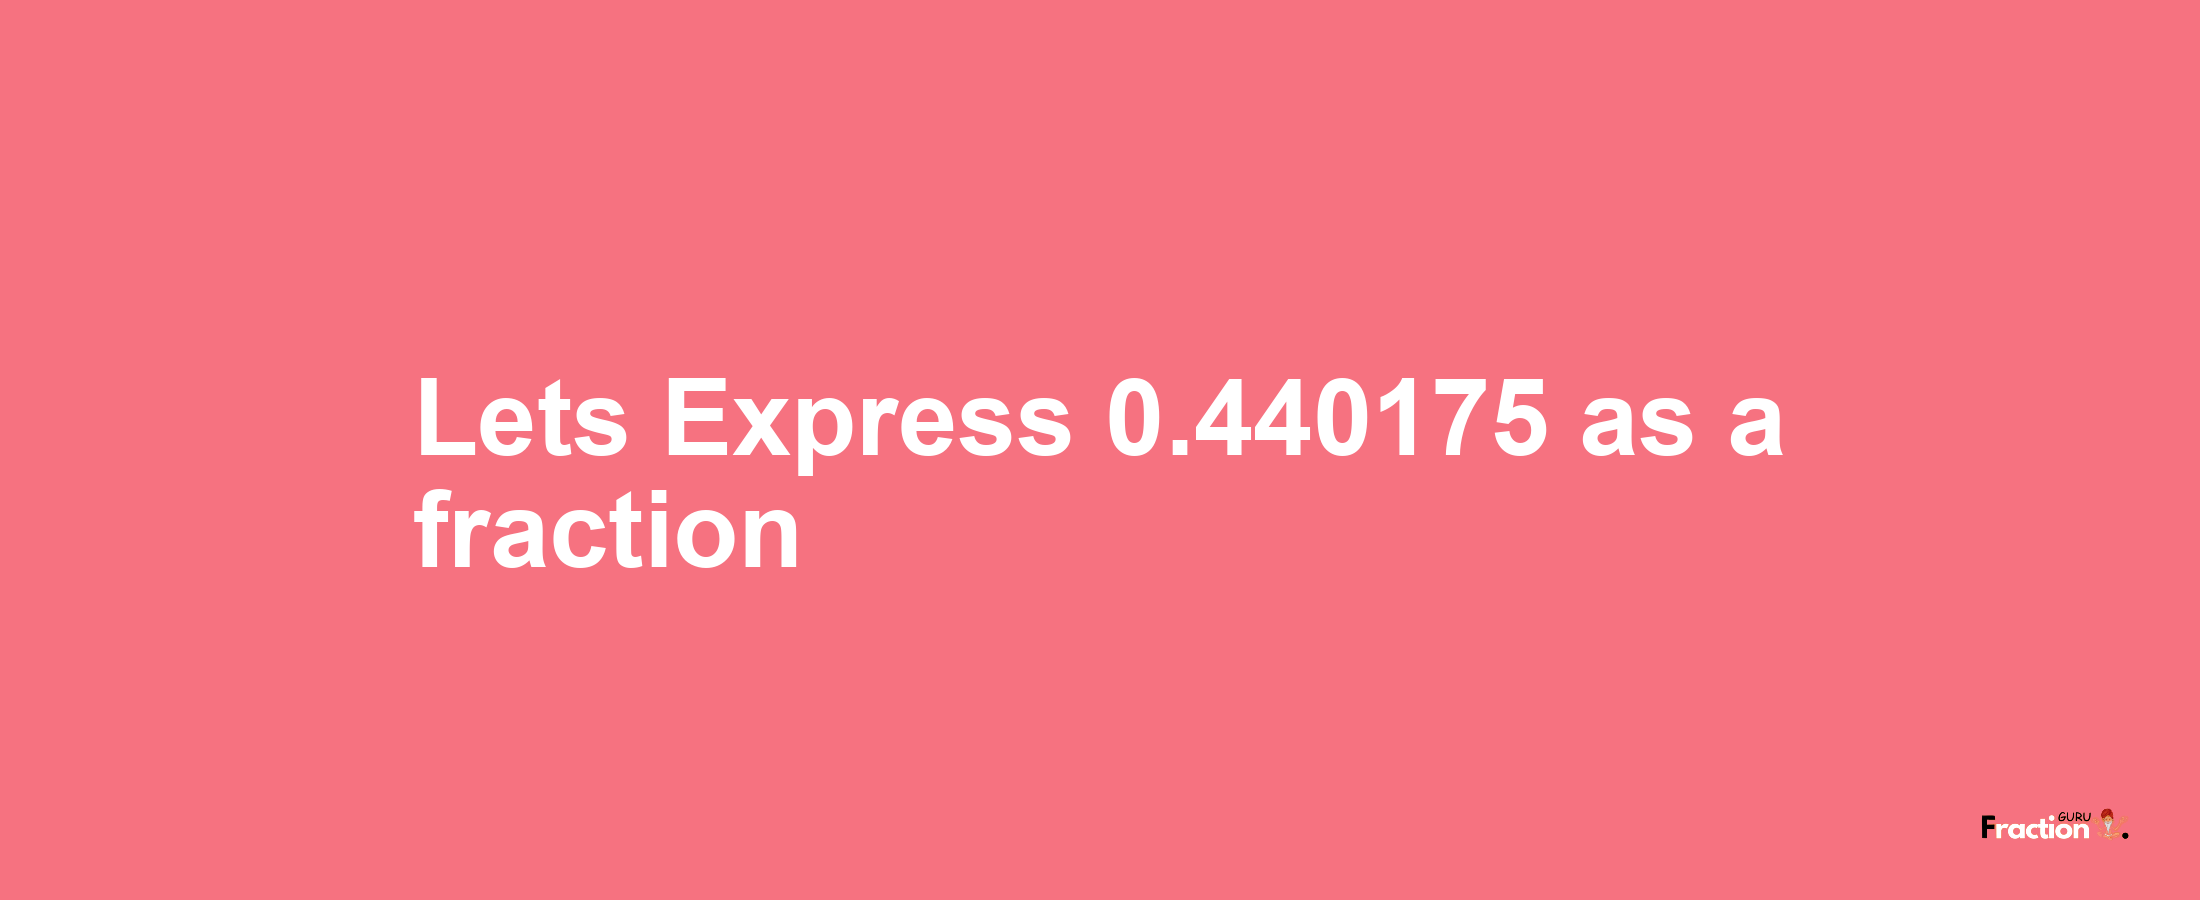 Lets Express 0.440175 as afraction